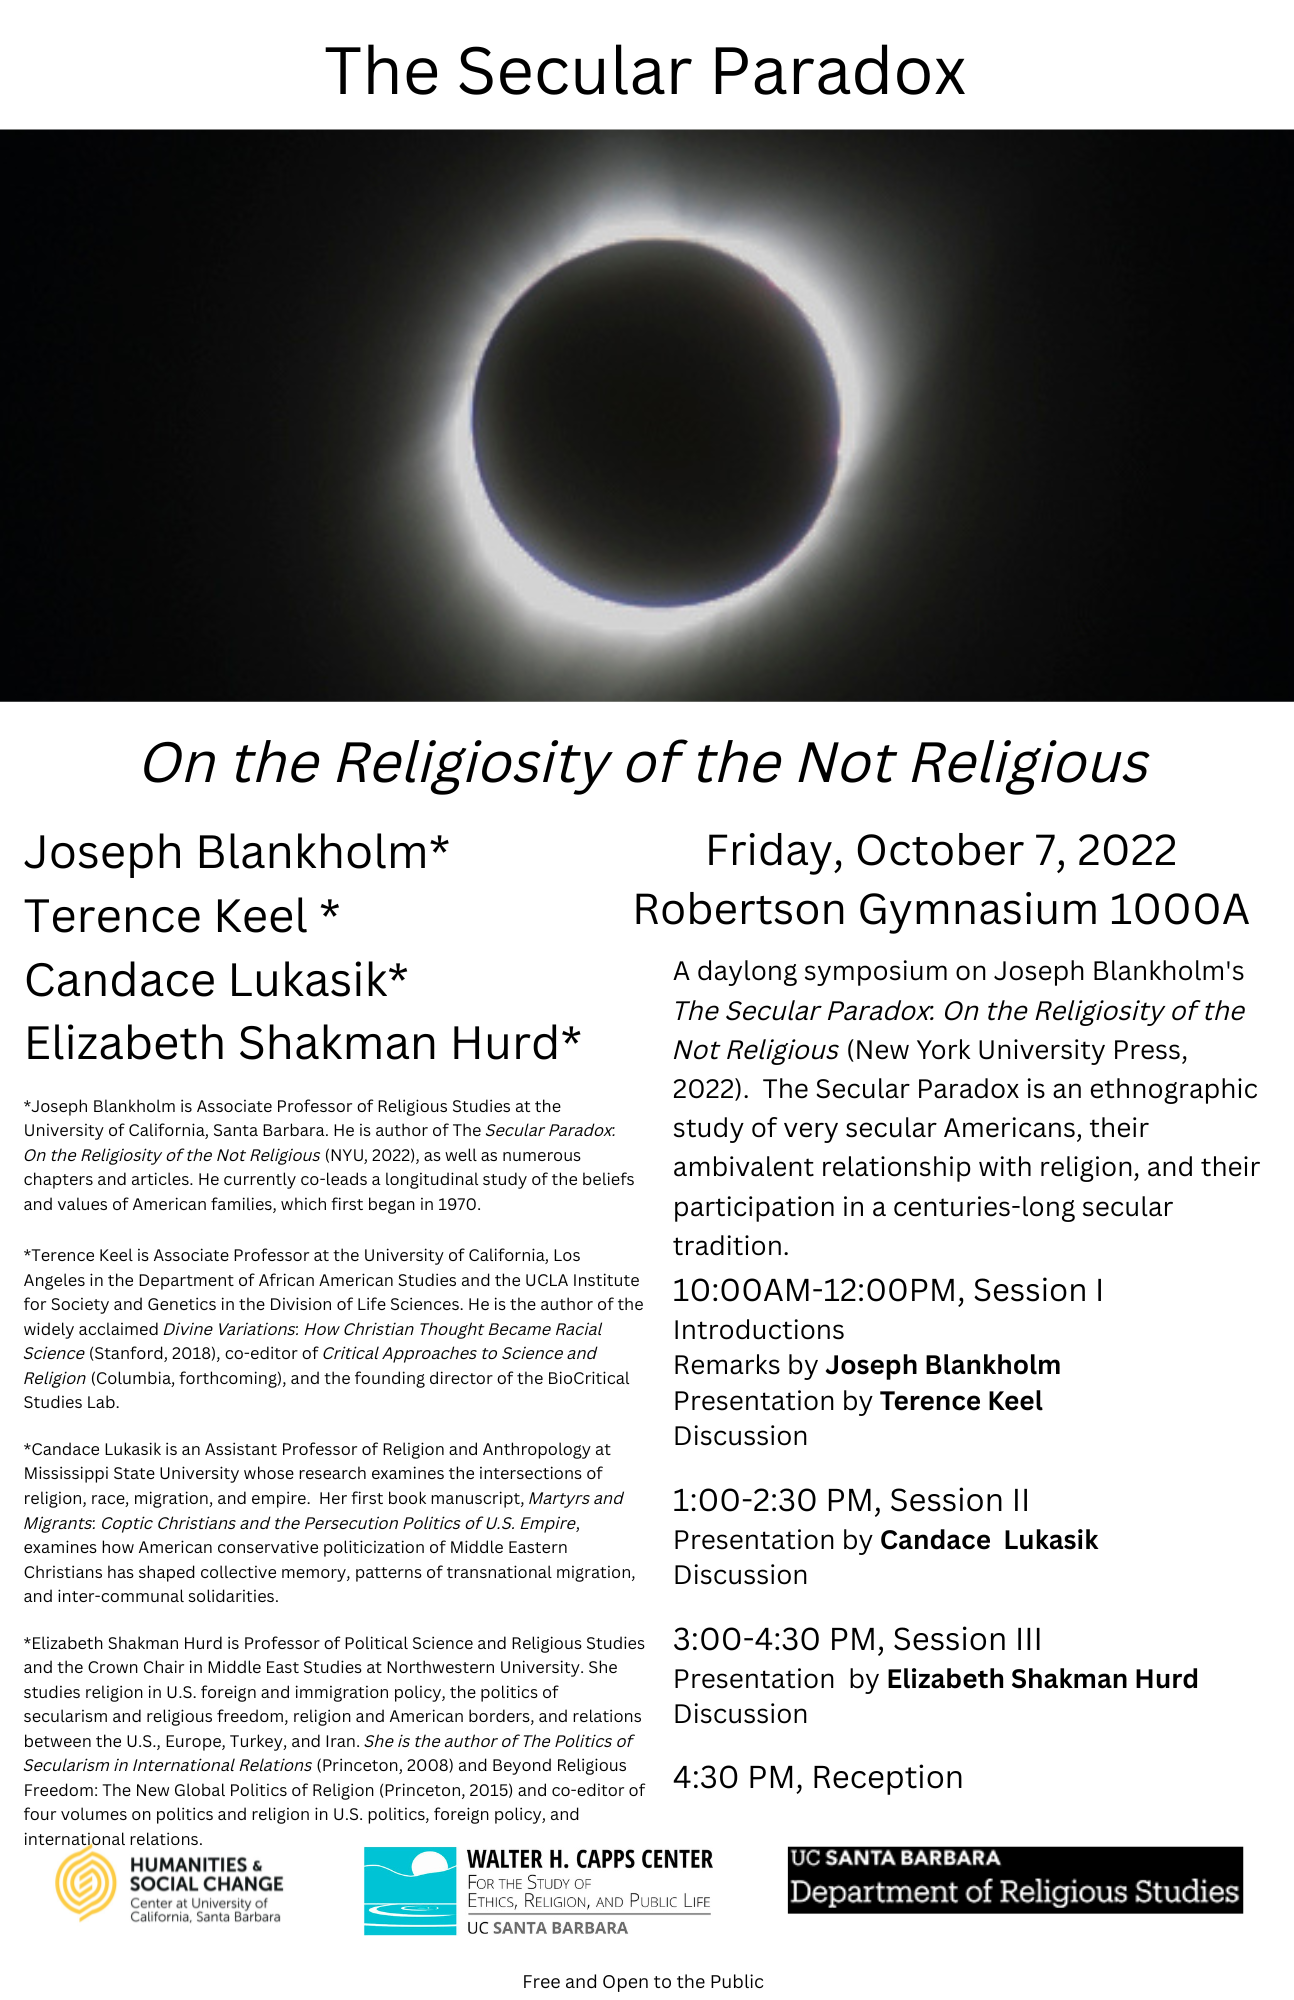 Symposium on "The Secular Paradox: On the Religiosity of the Not Religious"